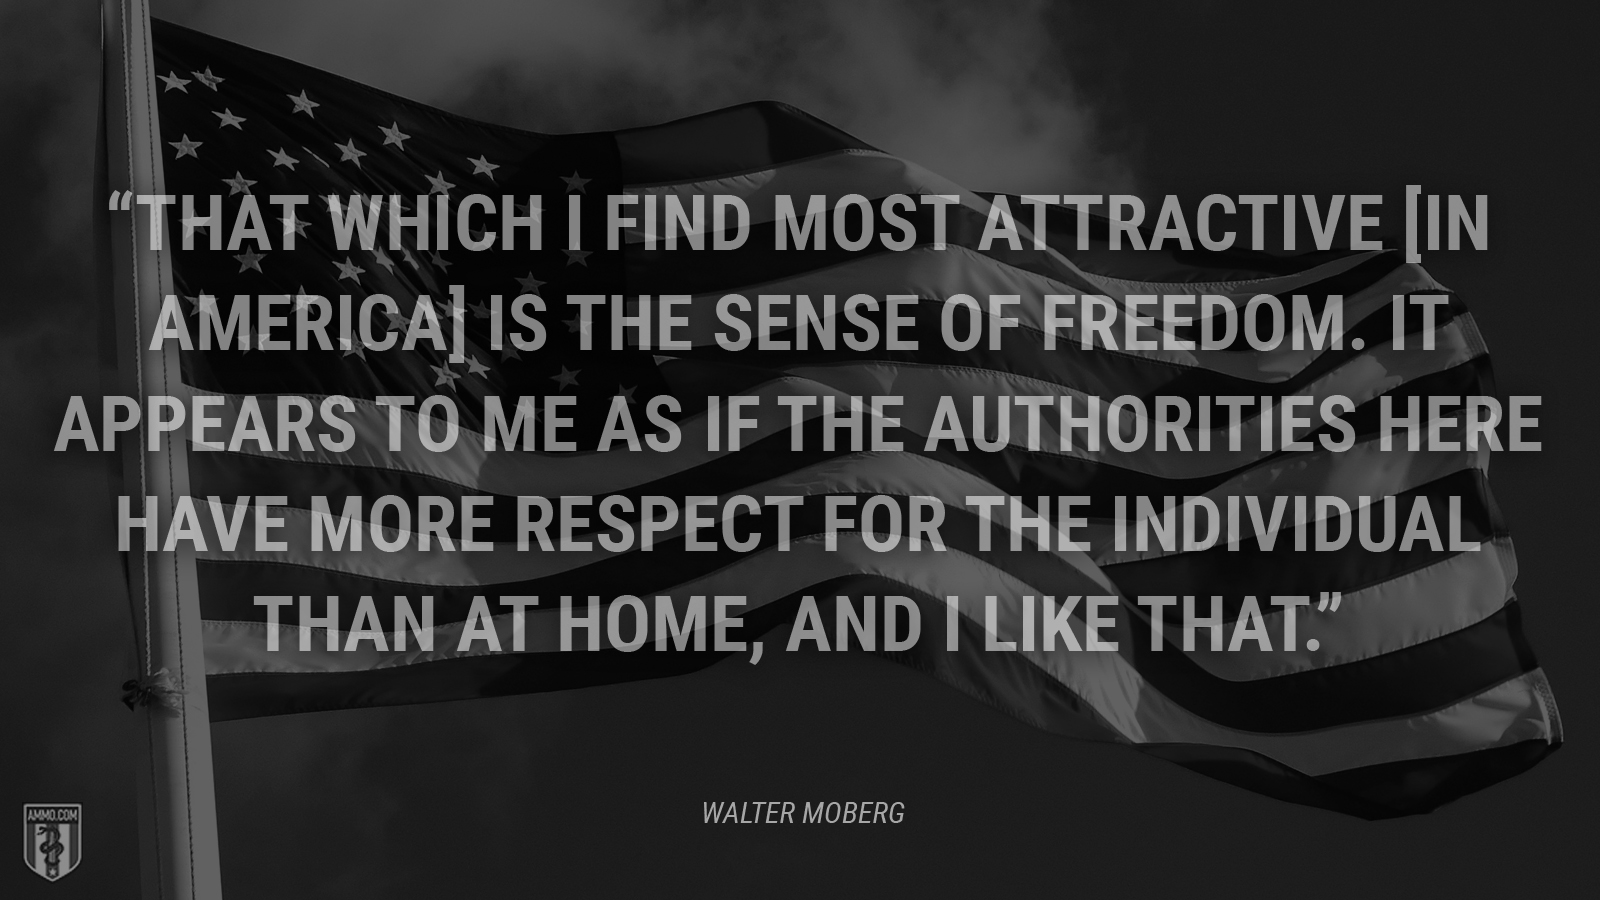 “That which I find most attractive [in America] is the sense of freedom. It appears to me as if the authorities here have more respect for the individual than at home, and I like that.” - Walter Moberg